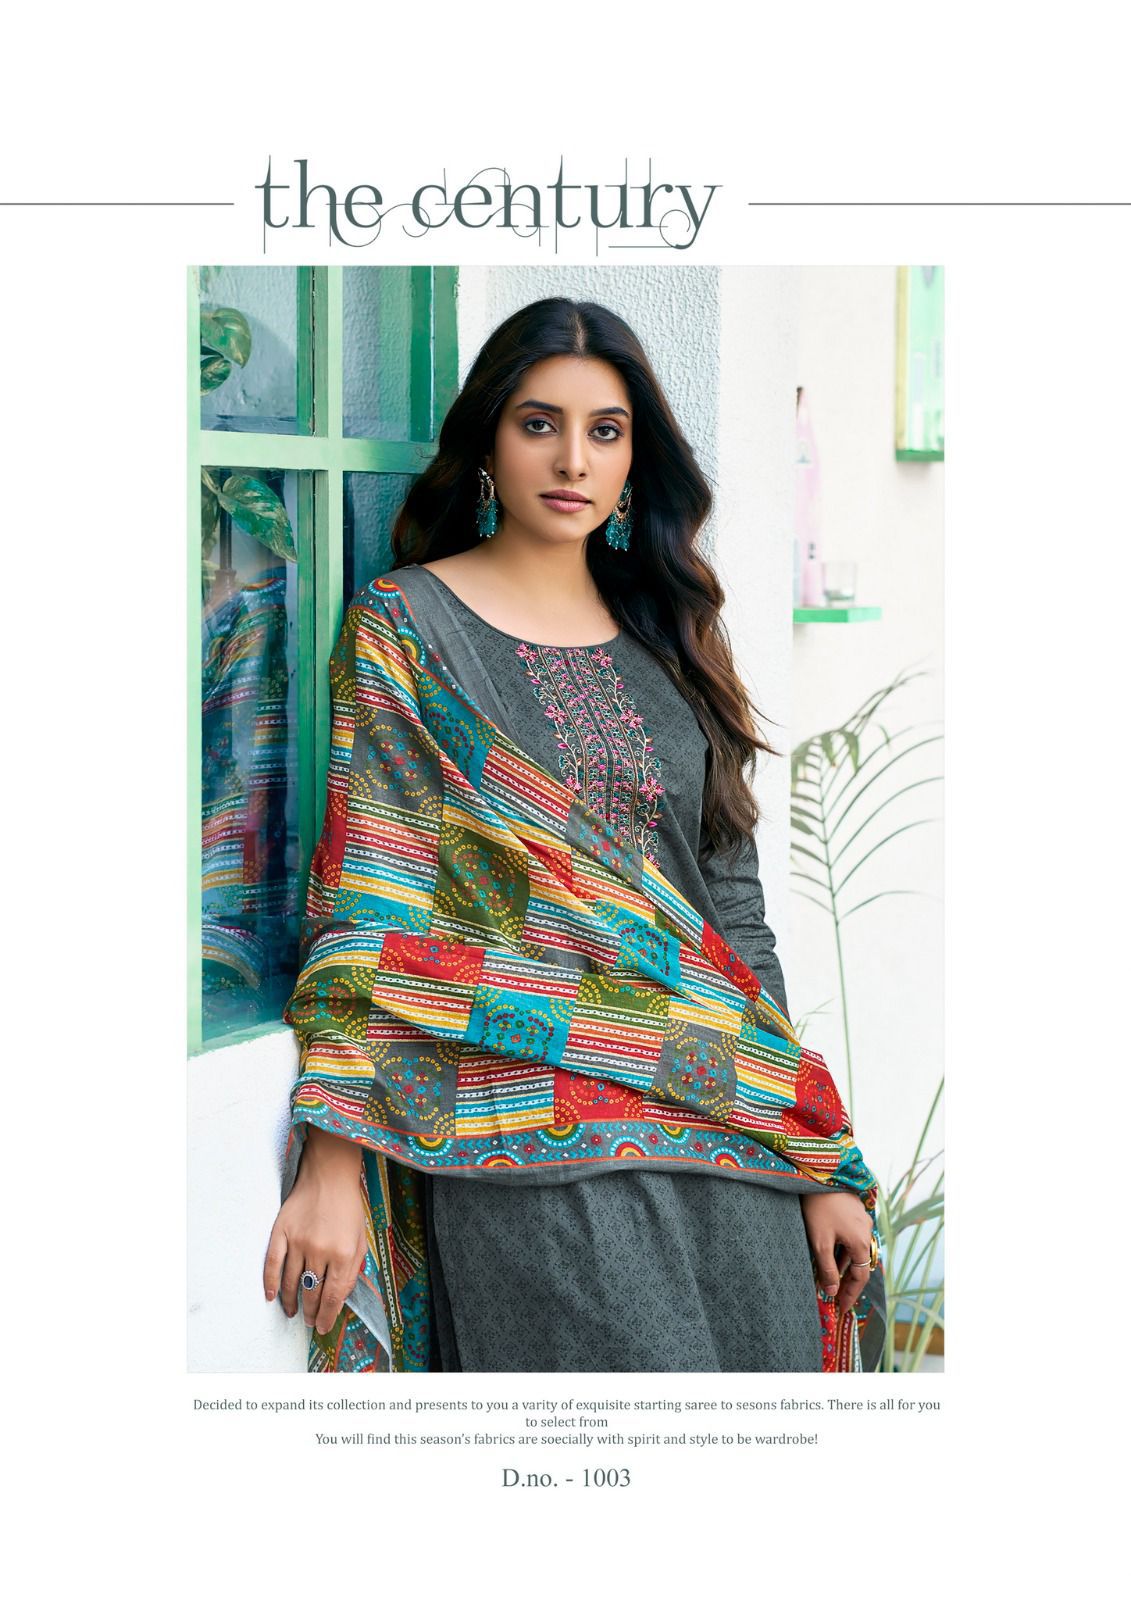 Saanvi Trends Romani Heavy Cotton Printed With Embroidery Work Dress Material Supplier In Surat